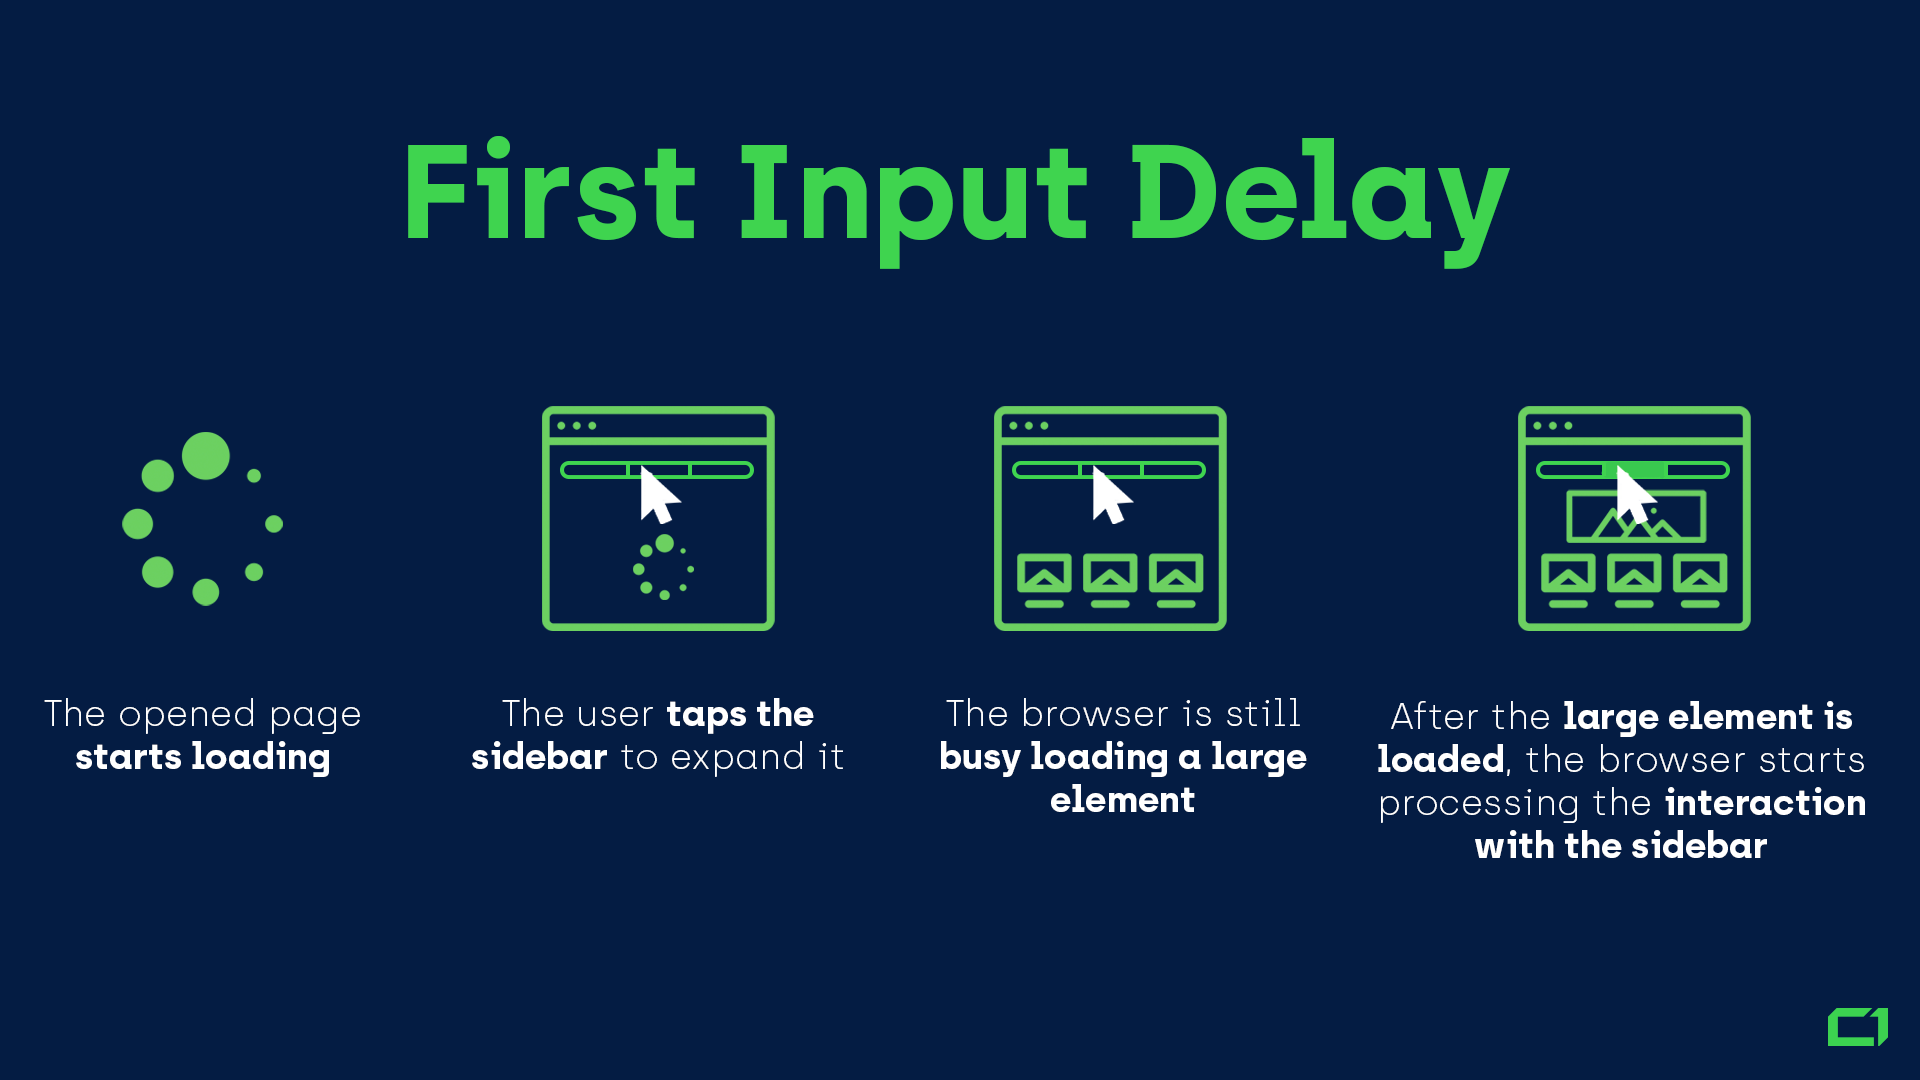 An example of First Input Delay: the opened page starts loading, the user taps the sidebar to expand it, the browser is still busy loading an image, and once the image is loaded, the browser can process the user input.